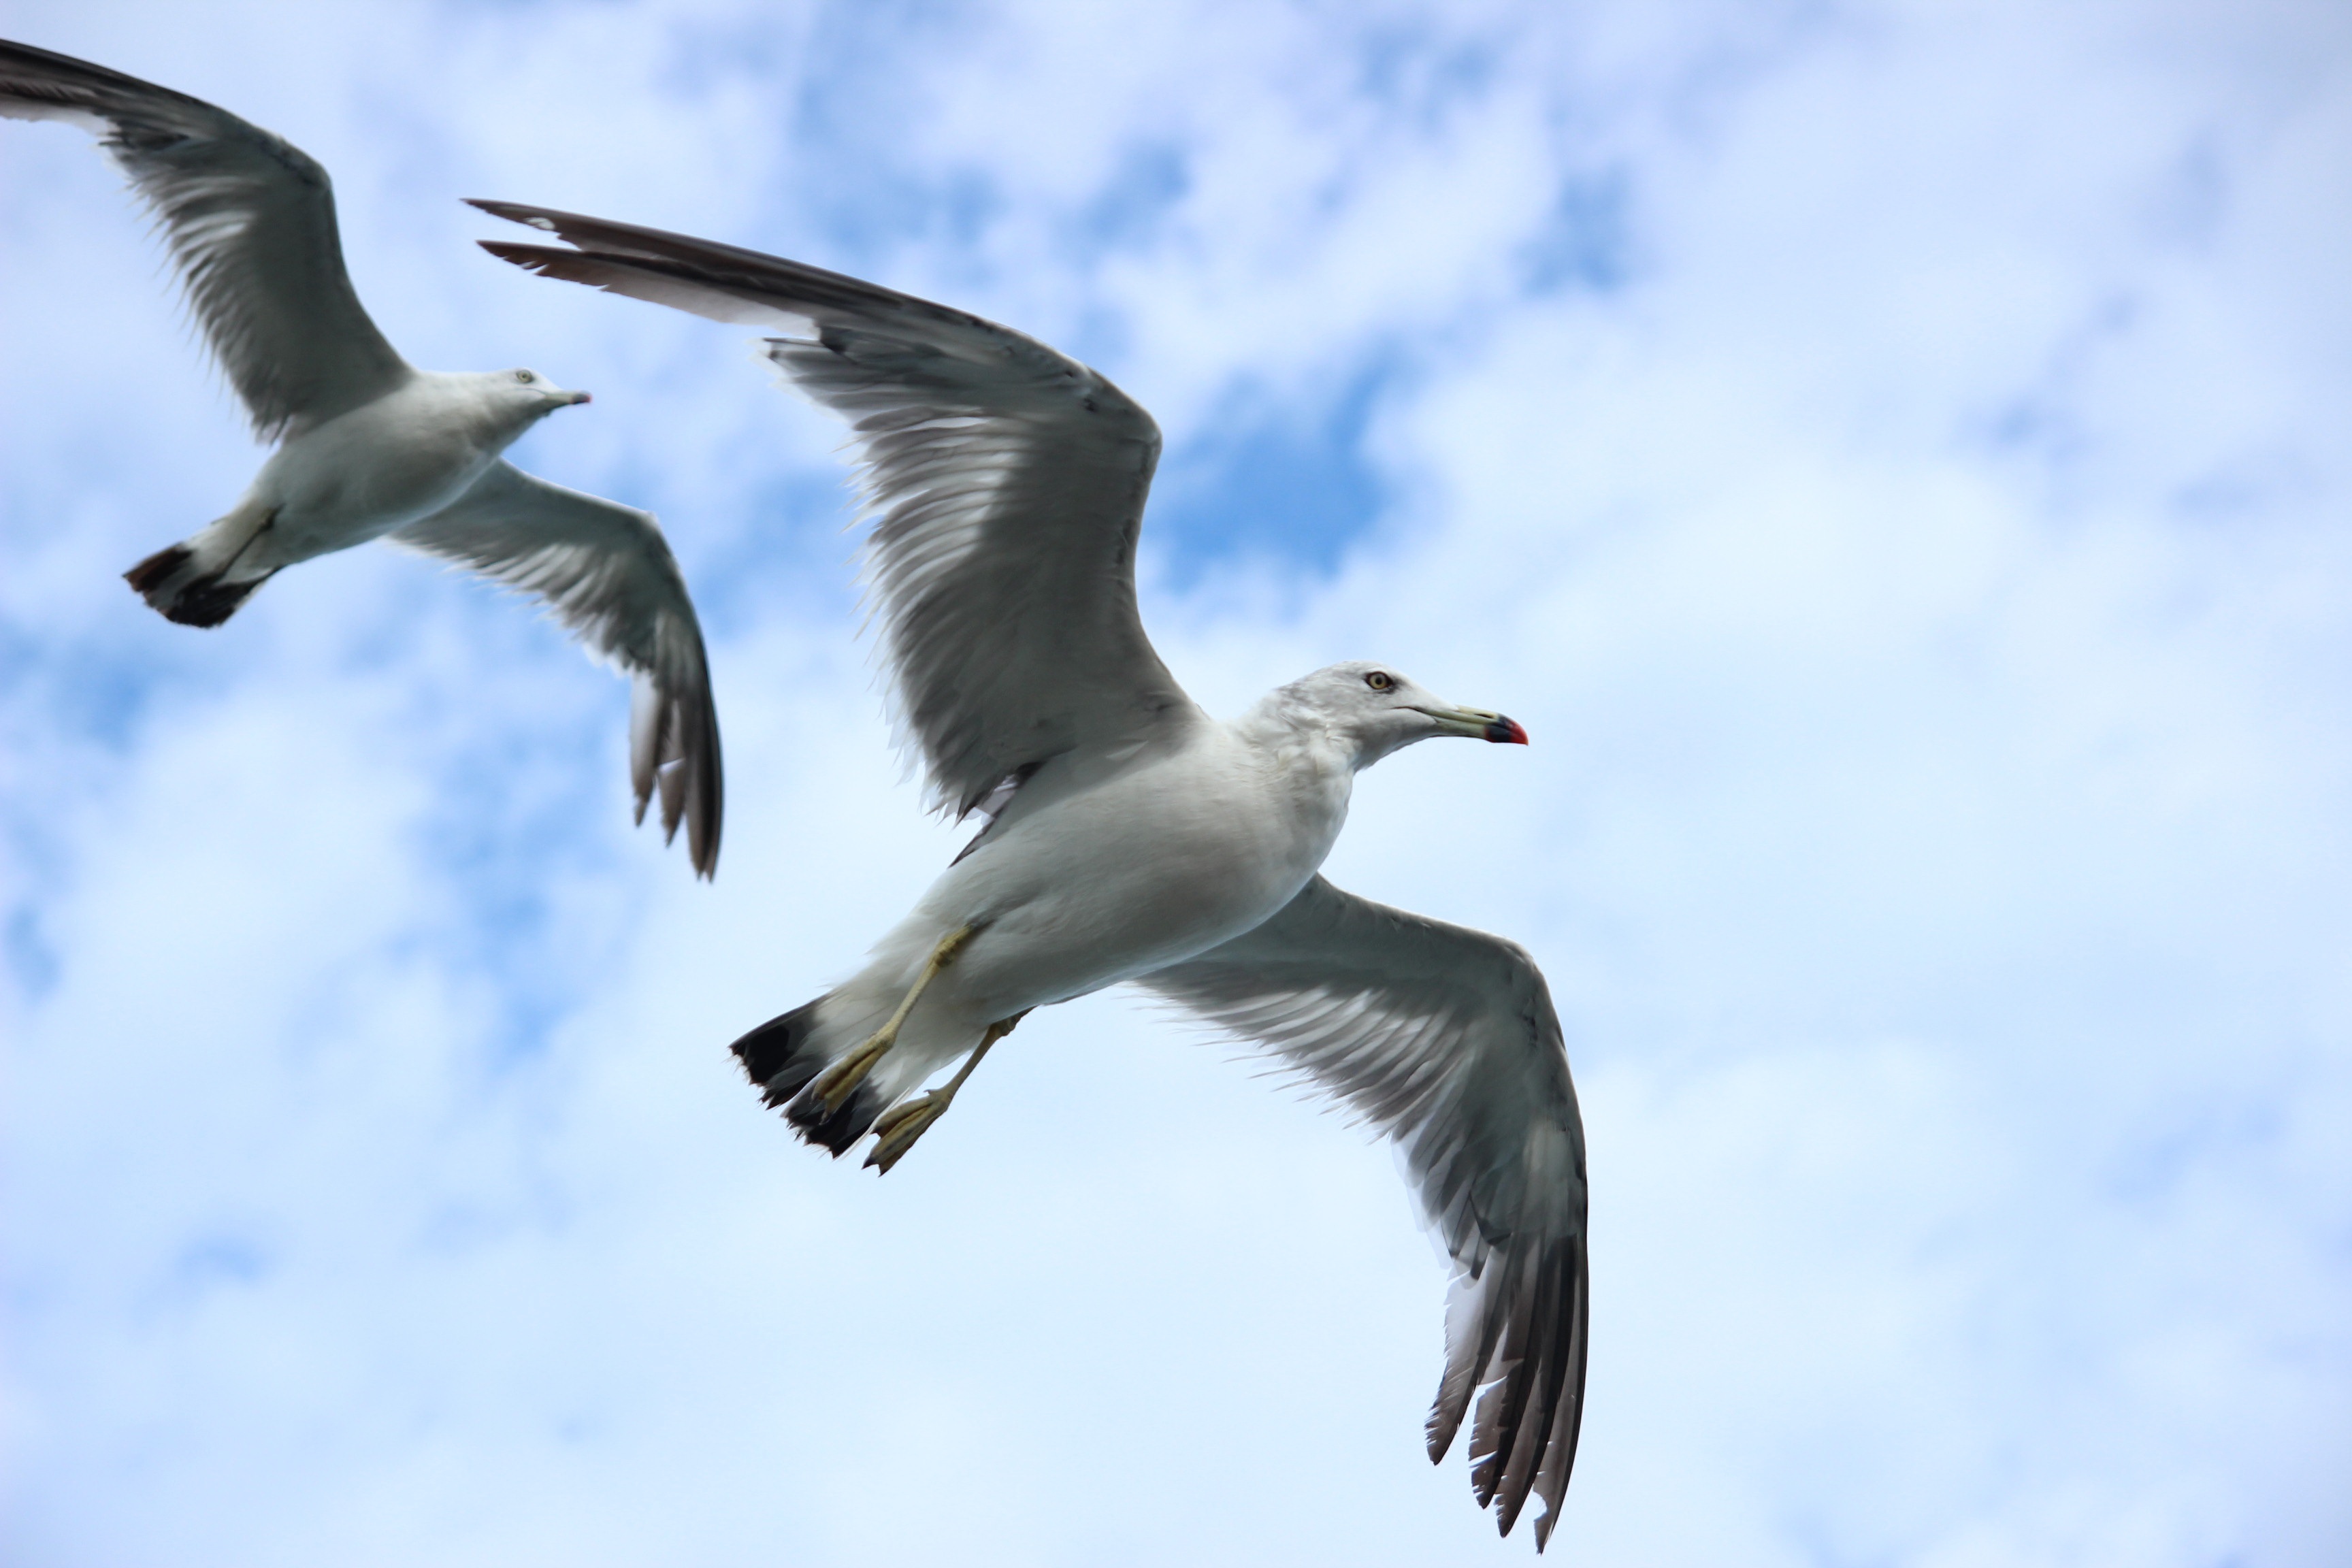 two seagulls are flying in the sky together.